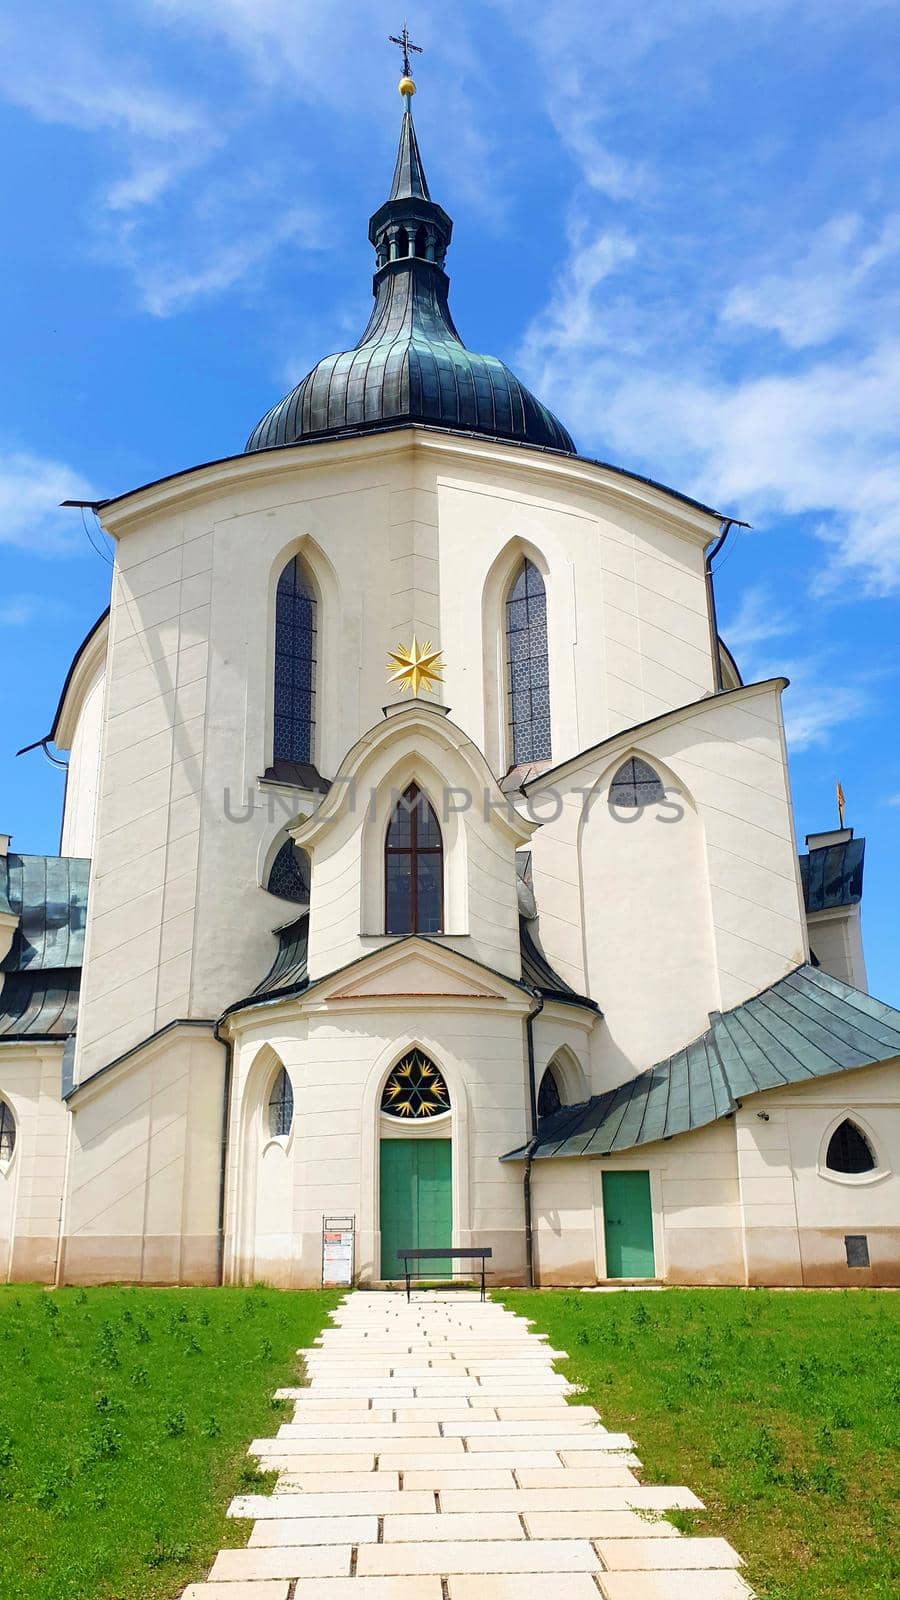 Church of St. John of Nepomuk on Zelena Hora (UNESCO monument). It was built in baroque gothic style and was designed by architect Jan Blazej Santini-Aichel. It is placed near Zdar nad Sazavou town at Moravia in Czech Republic.